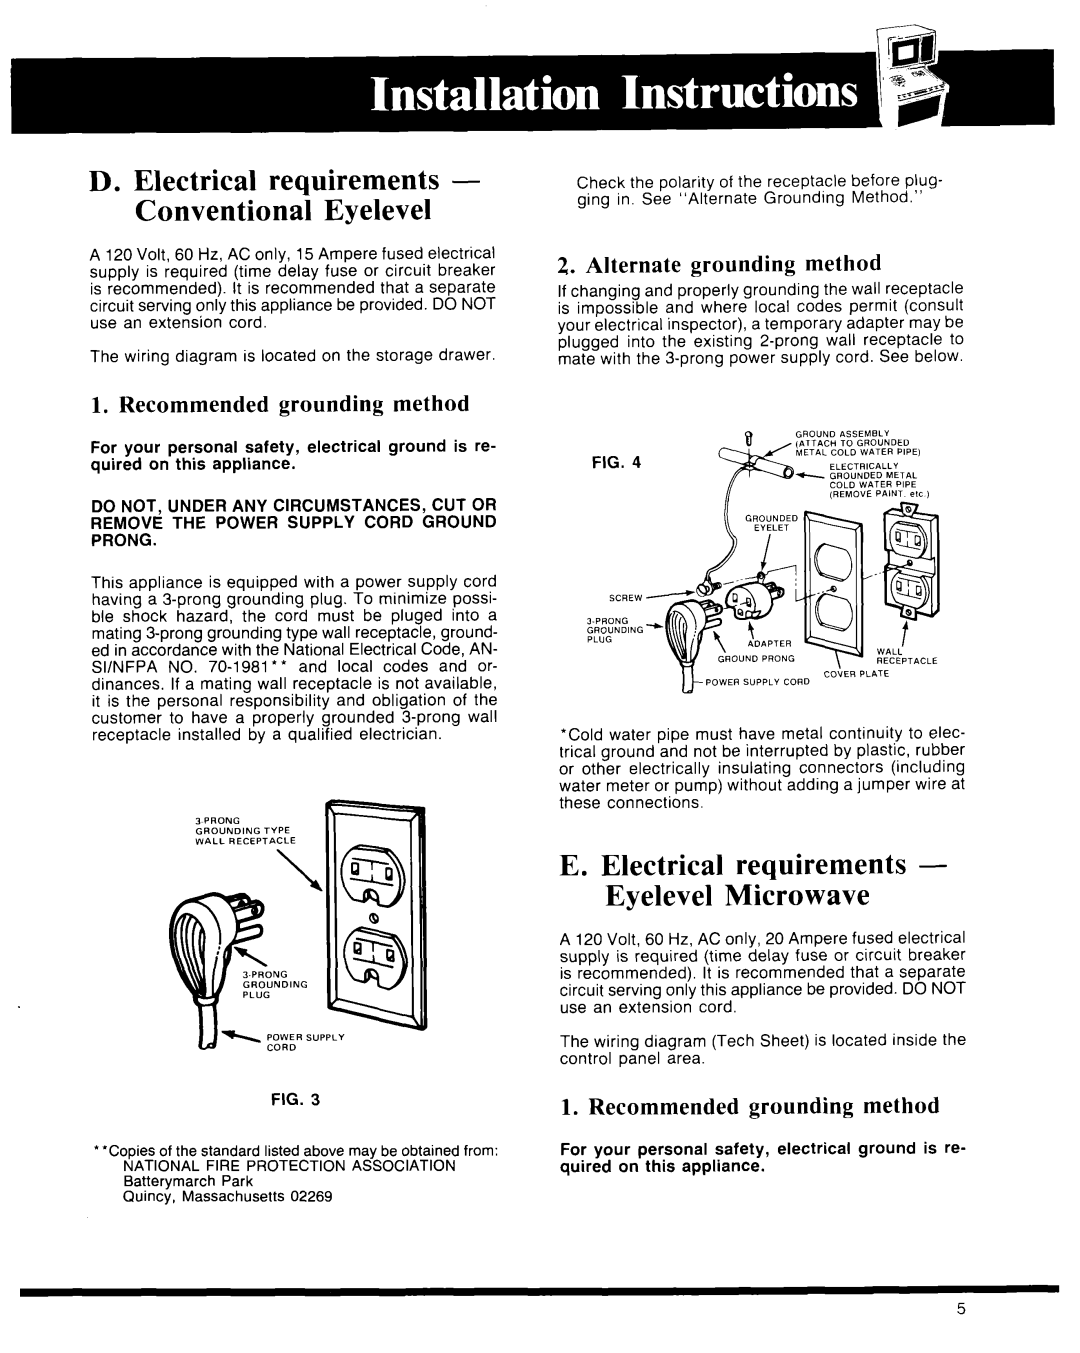 Whirlpool Microwave Oven manual E. Electrical requirements - Eyelevel Mi&owave, Recommended grounding method 